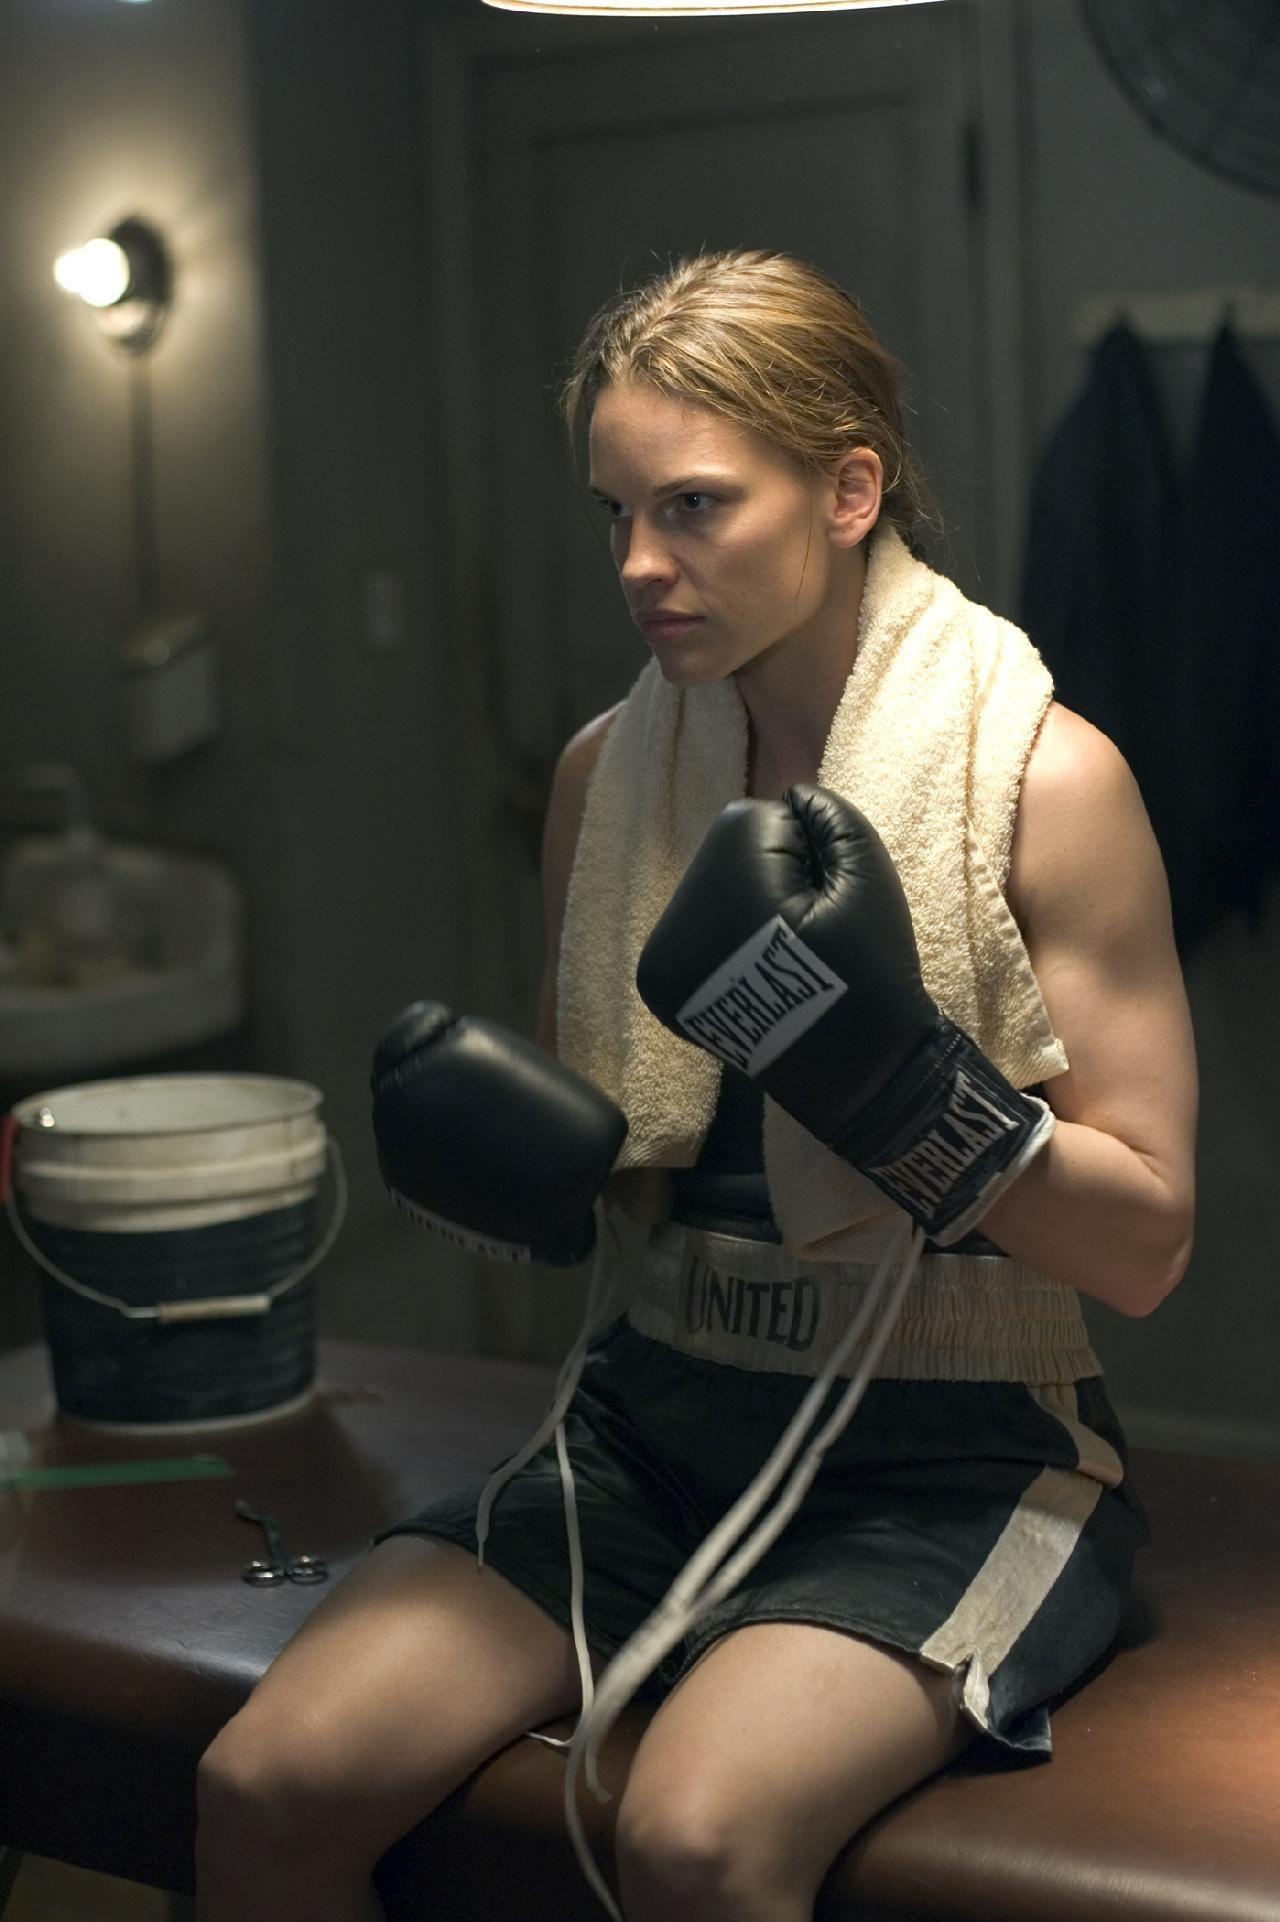 Million Dollar Baby: Mary Margaret "Maggie" Fitzgerald, a determined, aspiring boxer trained up by Frankie Dunn. 1280x1930 HD Background.